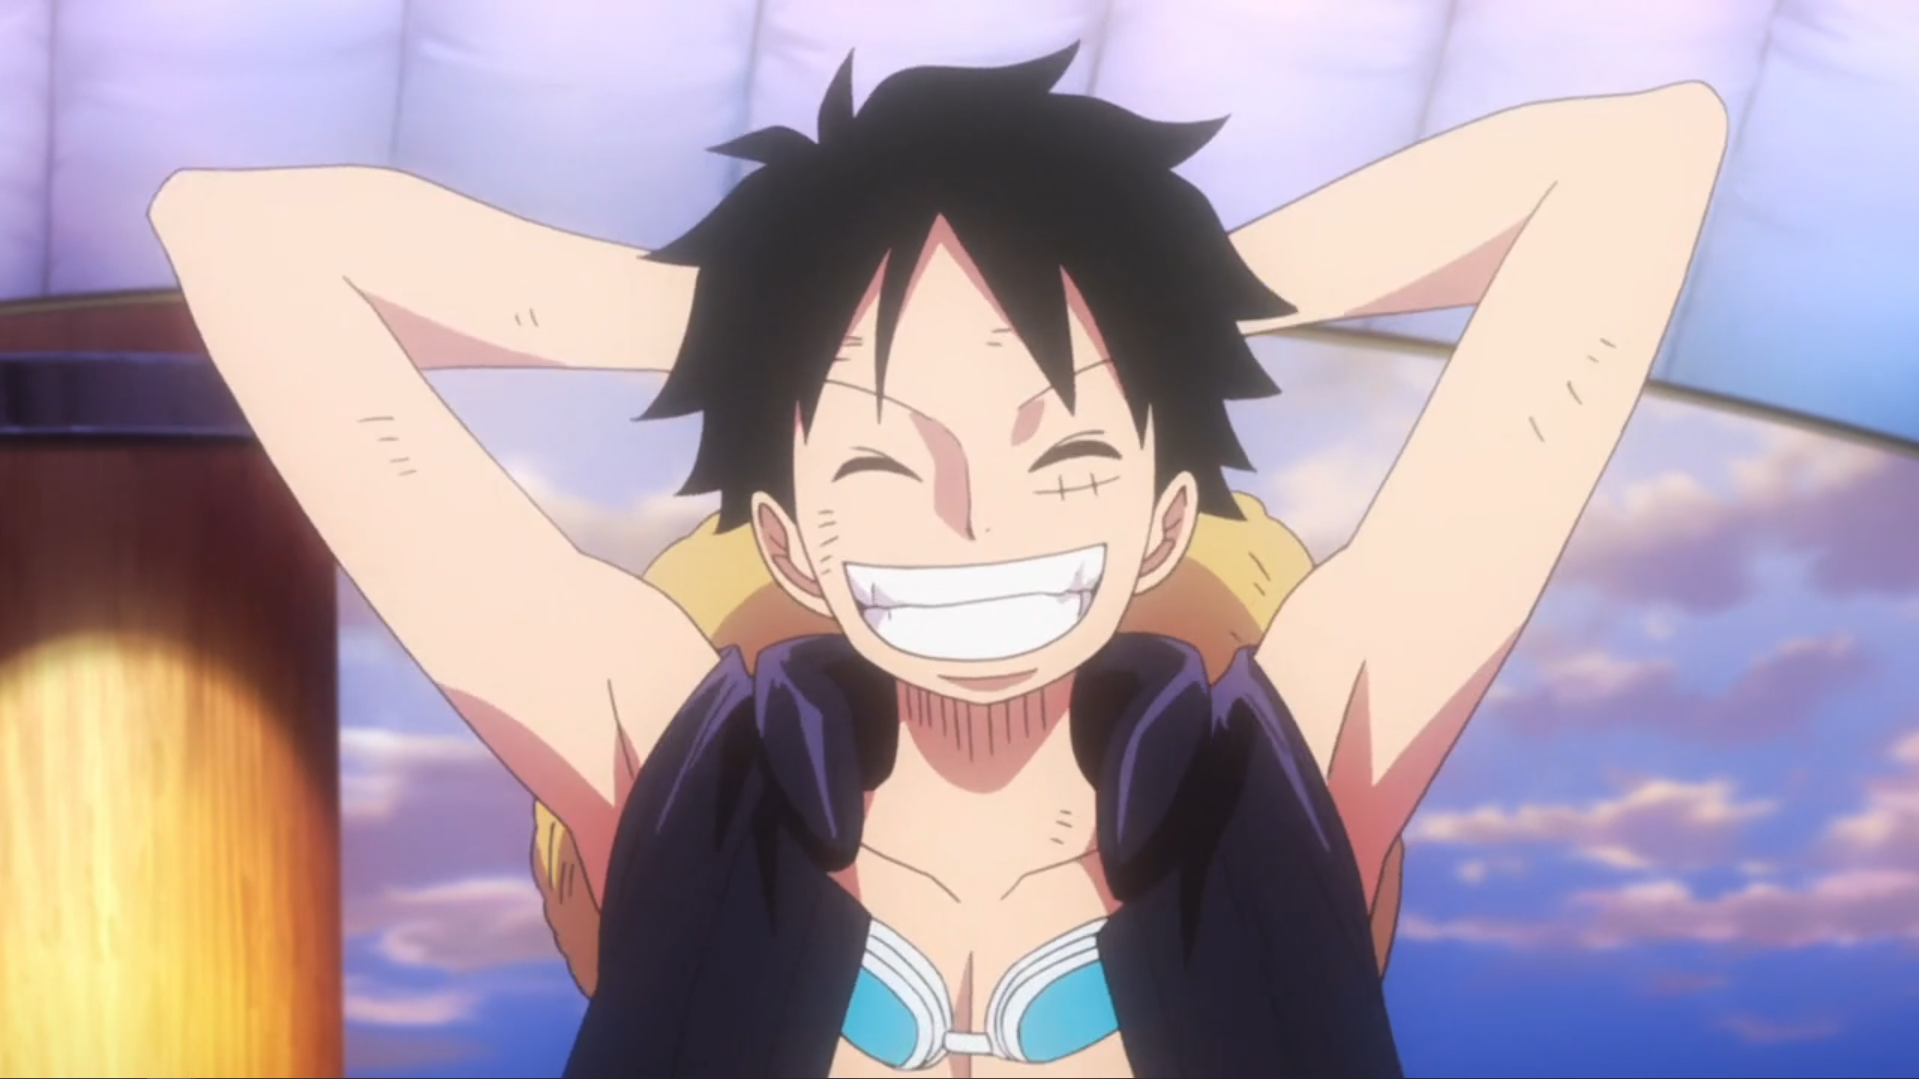 Luffy gives his trademark smile, with a carefree posture. The crew is on another adventure!